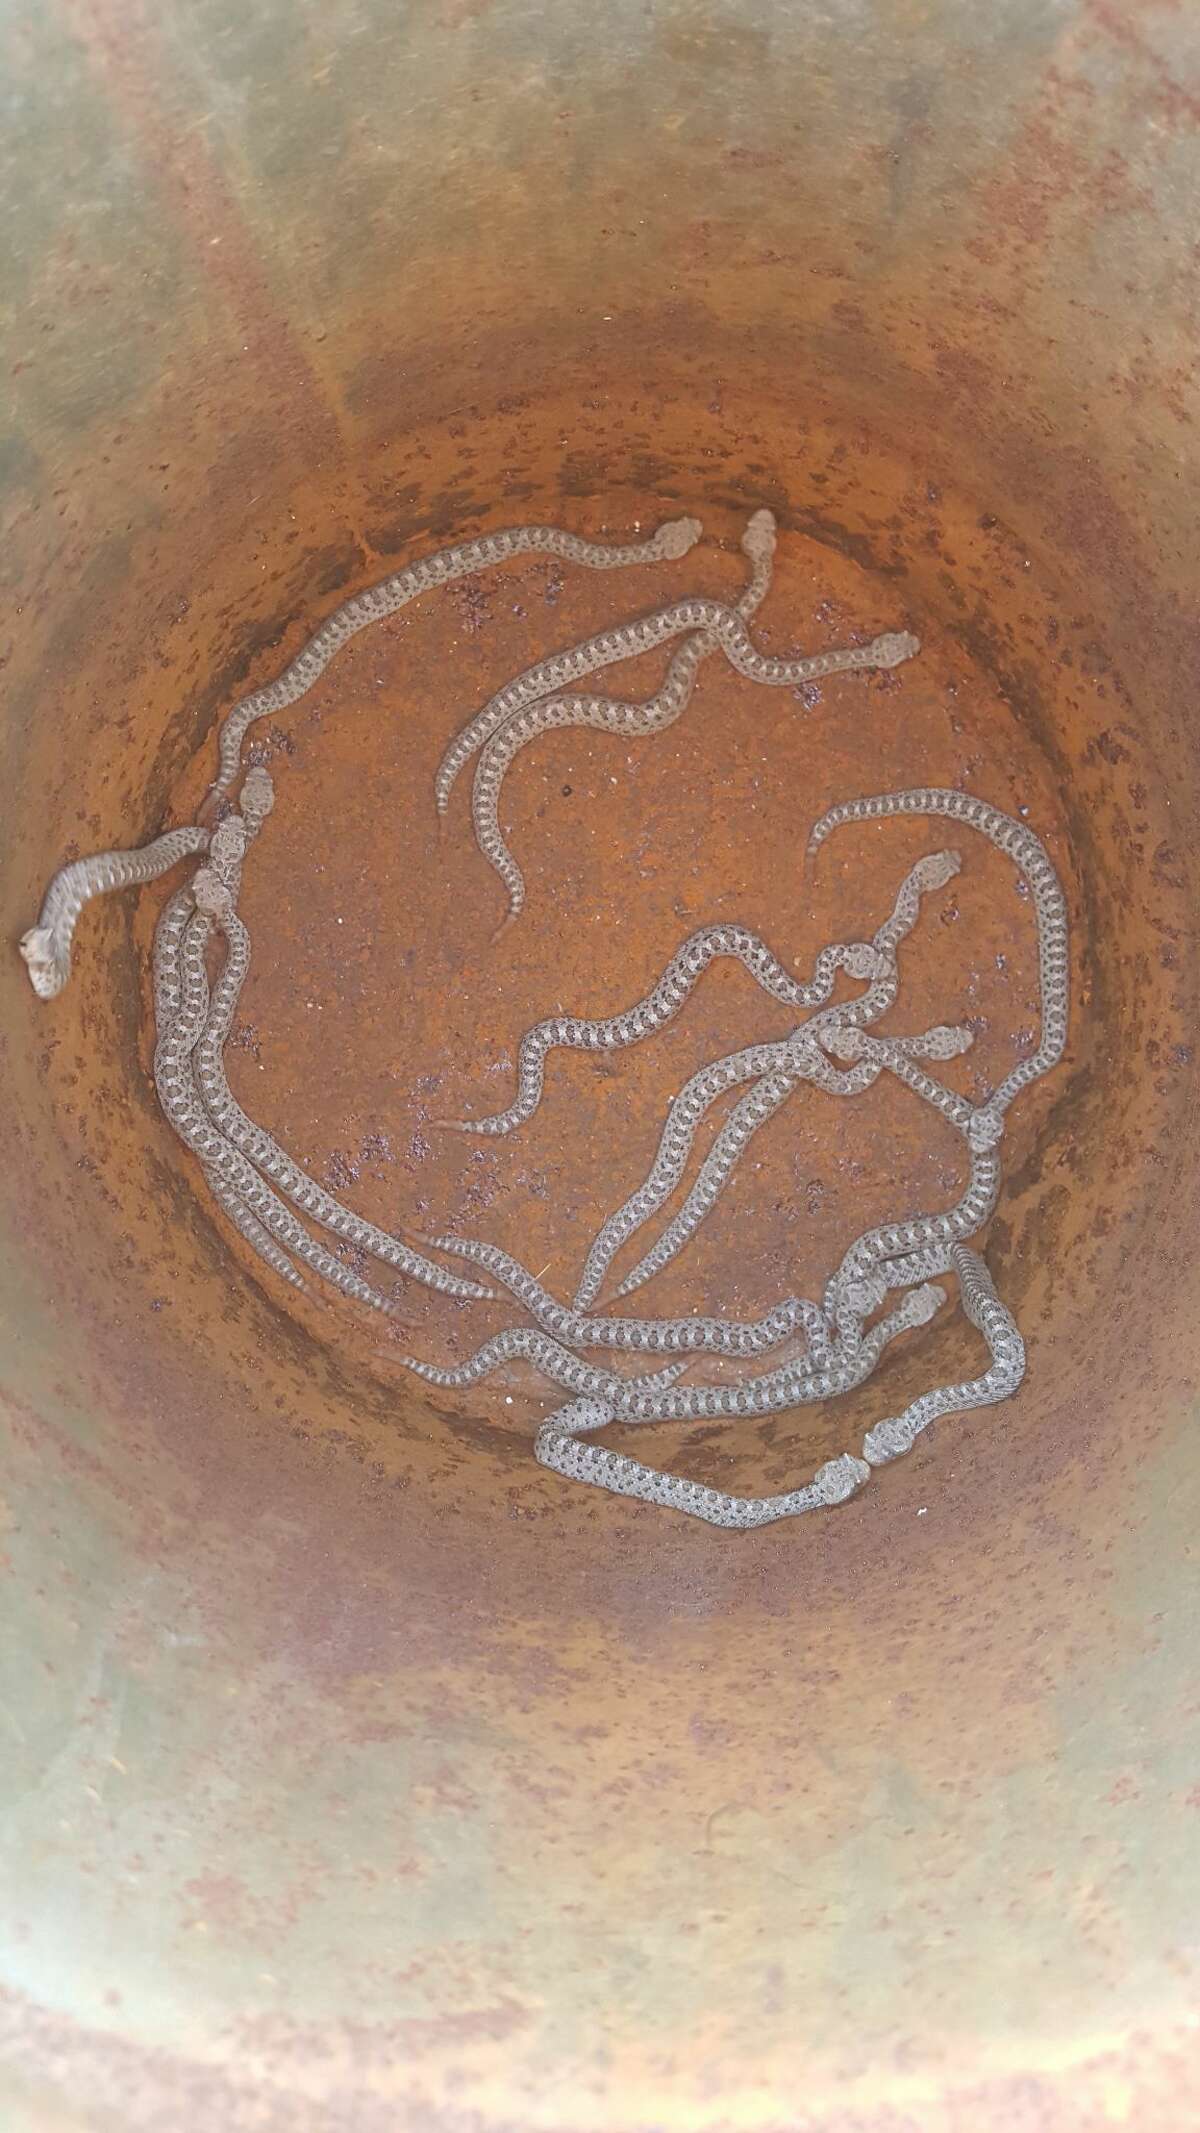 Animal Control Officer Shawna Villa-Rodriguez found not one, not two but 19 sidewinder rattlesnakes under the playhouse.